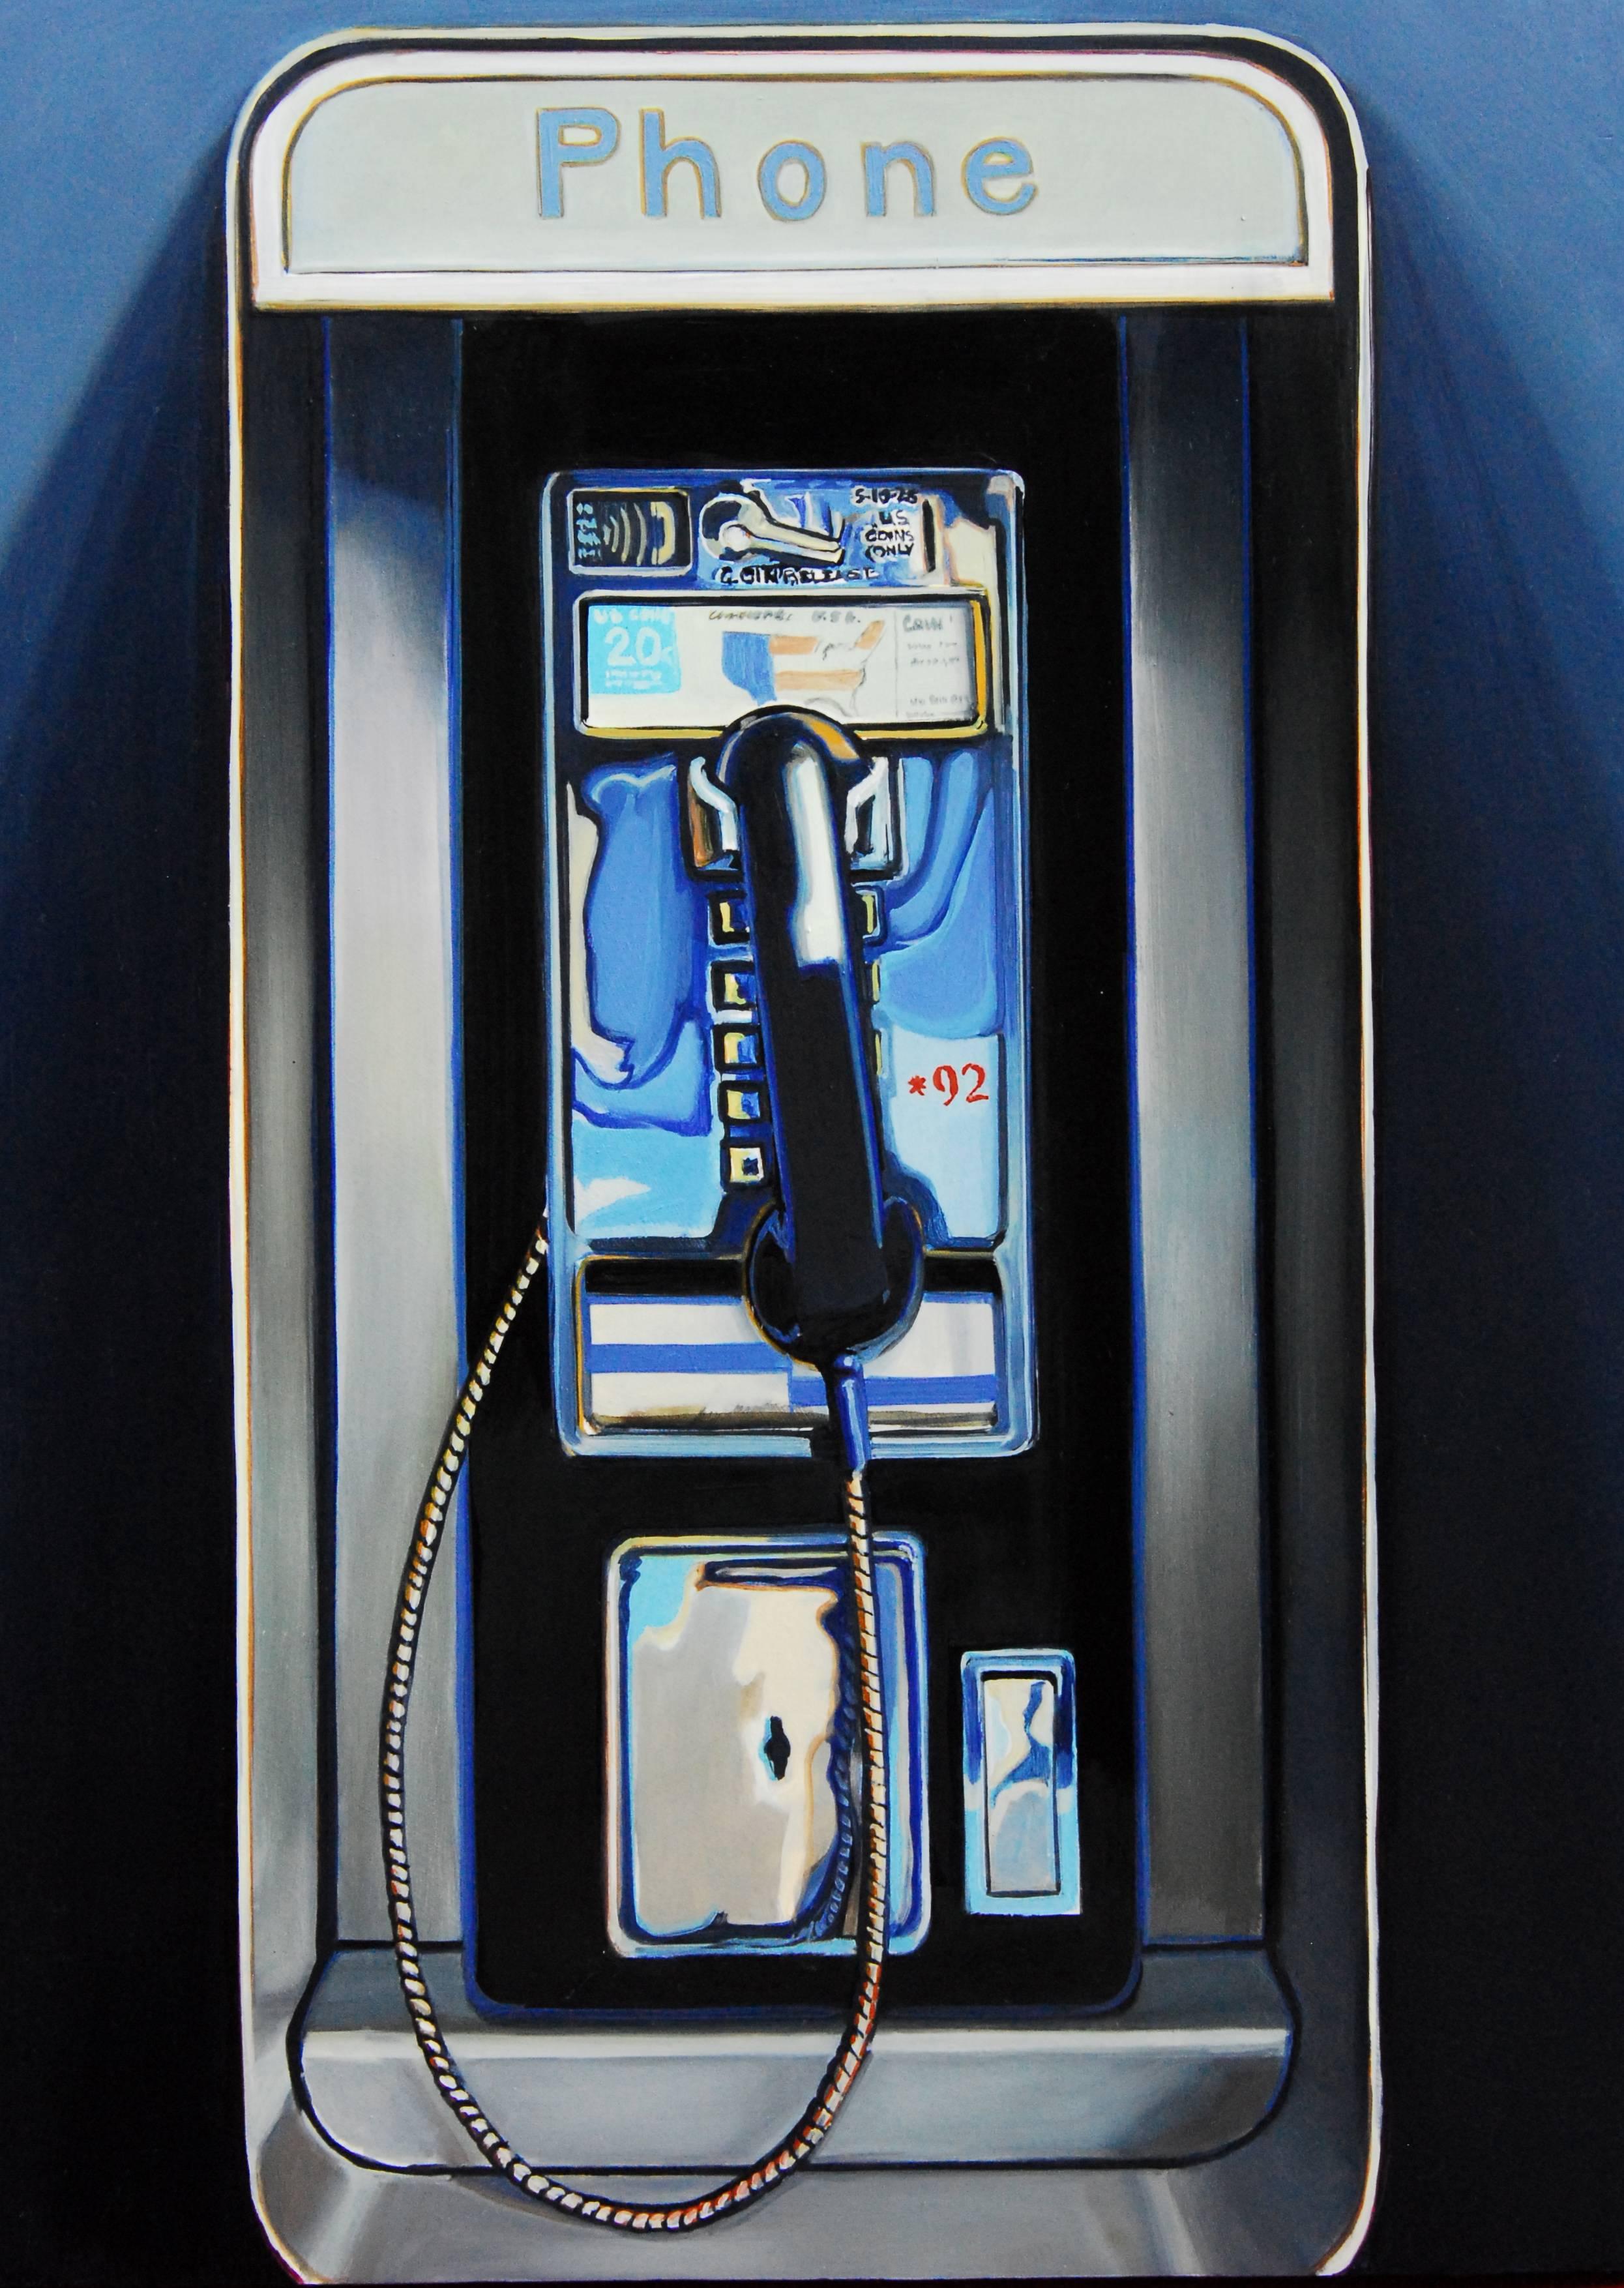 PAY PHONE - Painting by Glenn Ness